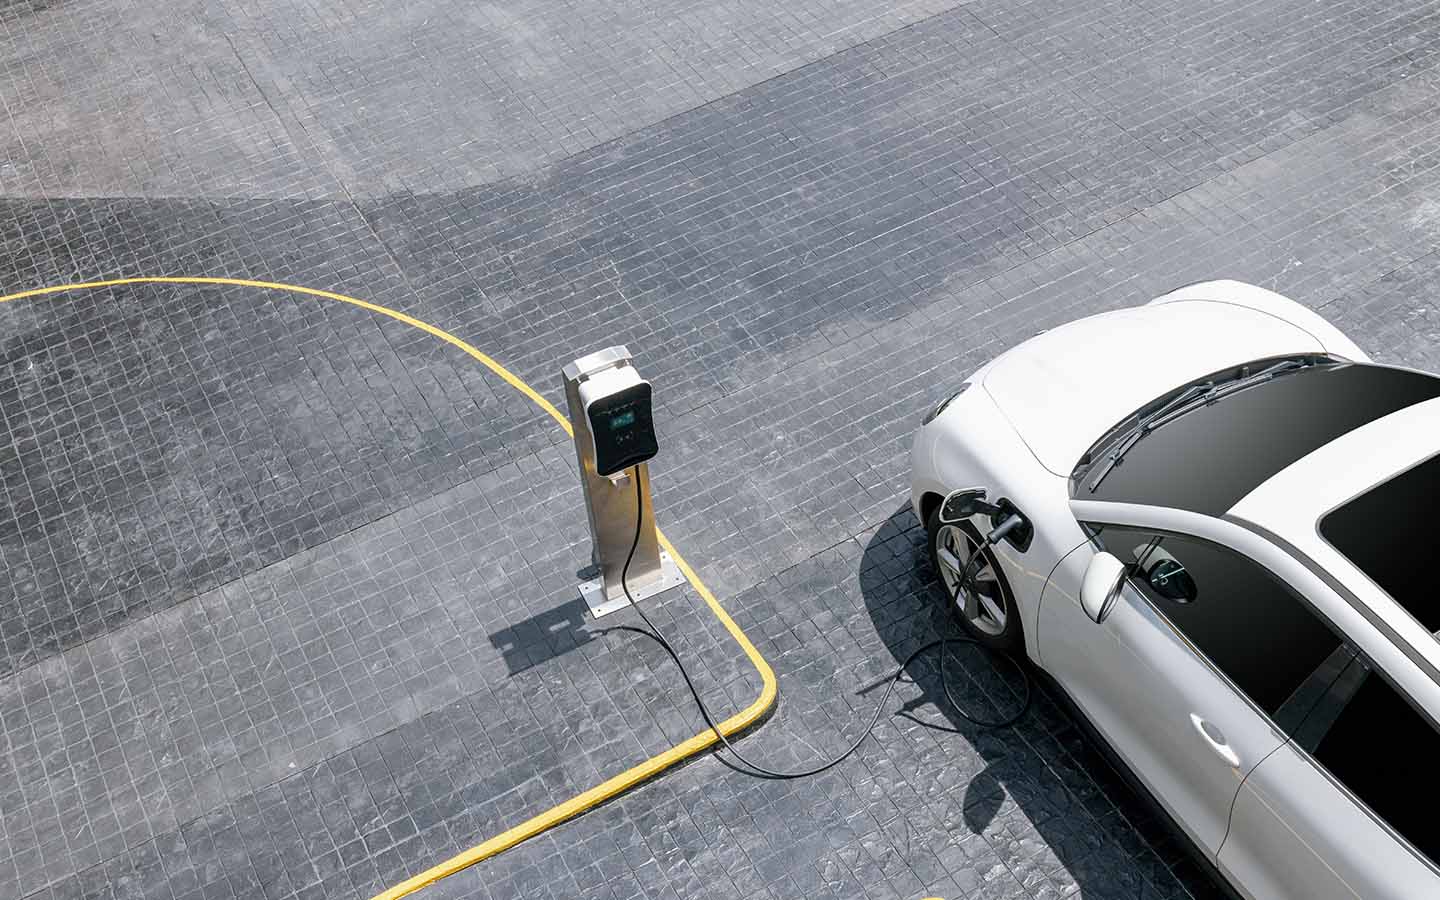 an effective way to Prevent Electric Vehicles from Catching Fire is to avoid exposure to sunlight